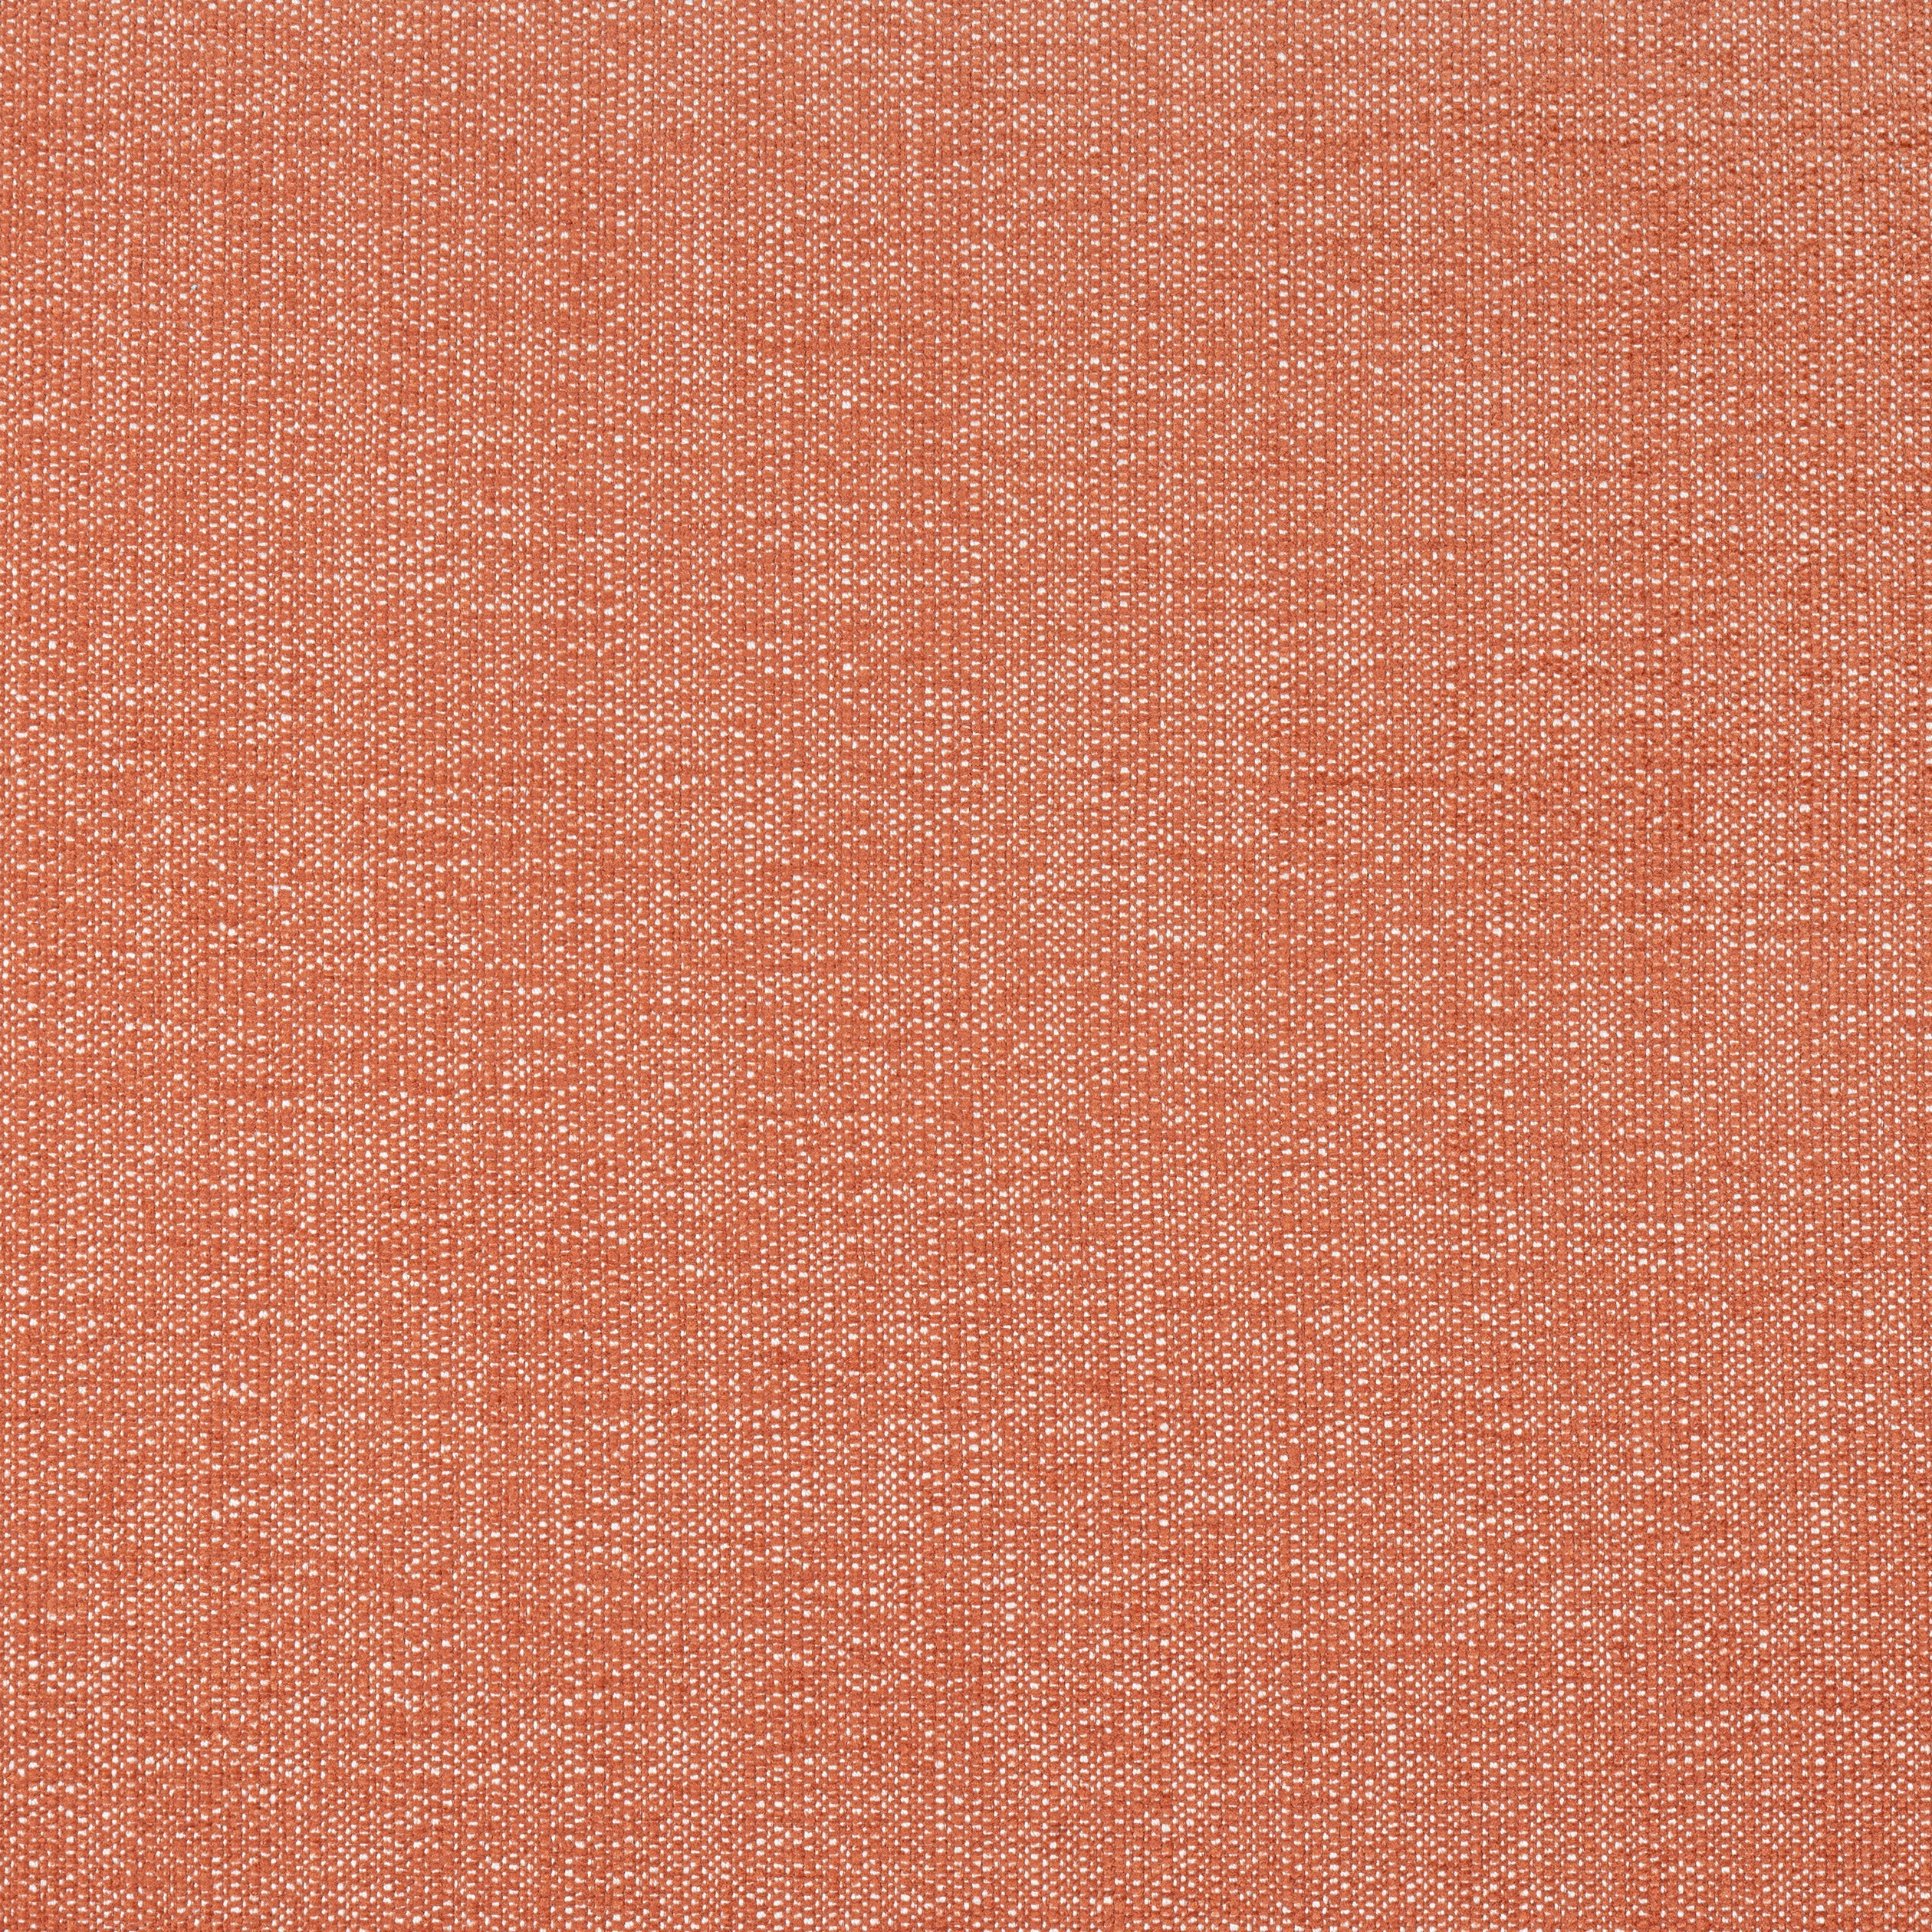 Veda fabric in terracotta color - pattern number W8713 - by Thibaut in the Haven Textures collection